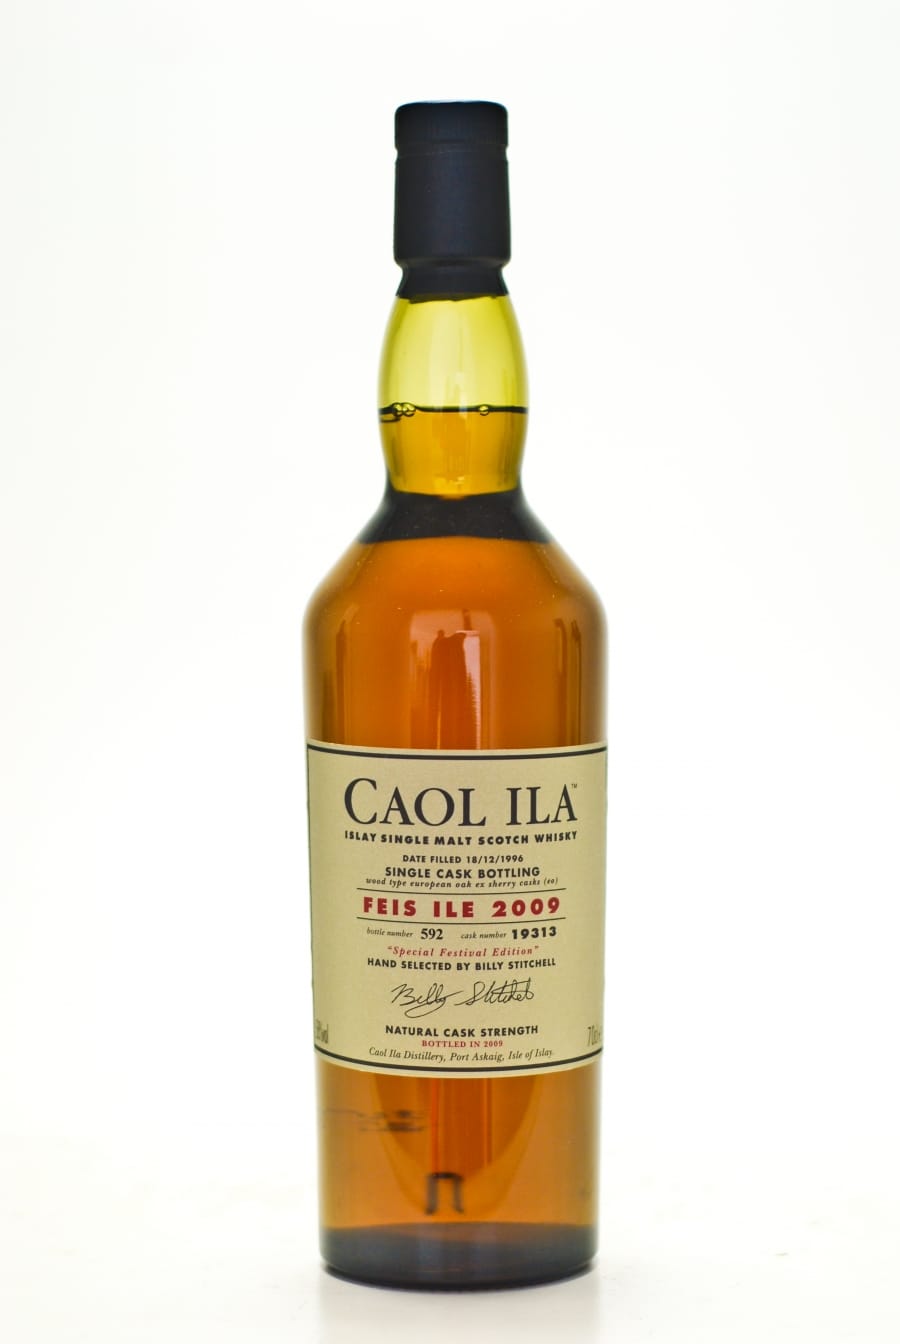 Caol Ila - Caol Ila Feis Isle 2009 12 Years Old ex sherry cask: 19313 1 Of 654 Bottles Barcode ID:5000281024783 1996 Perfect